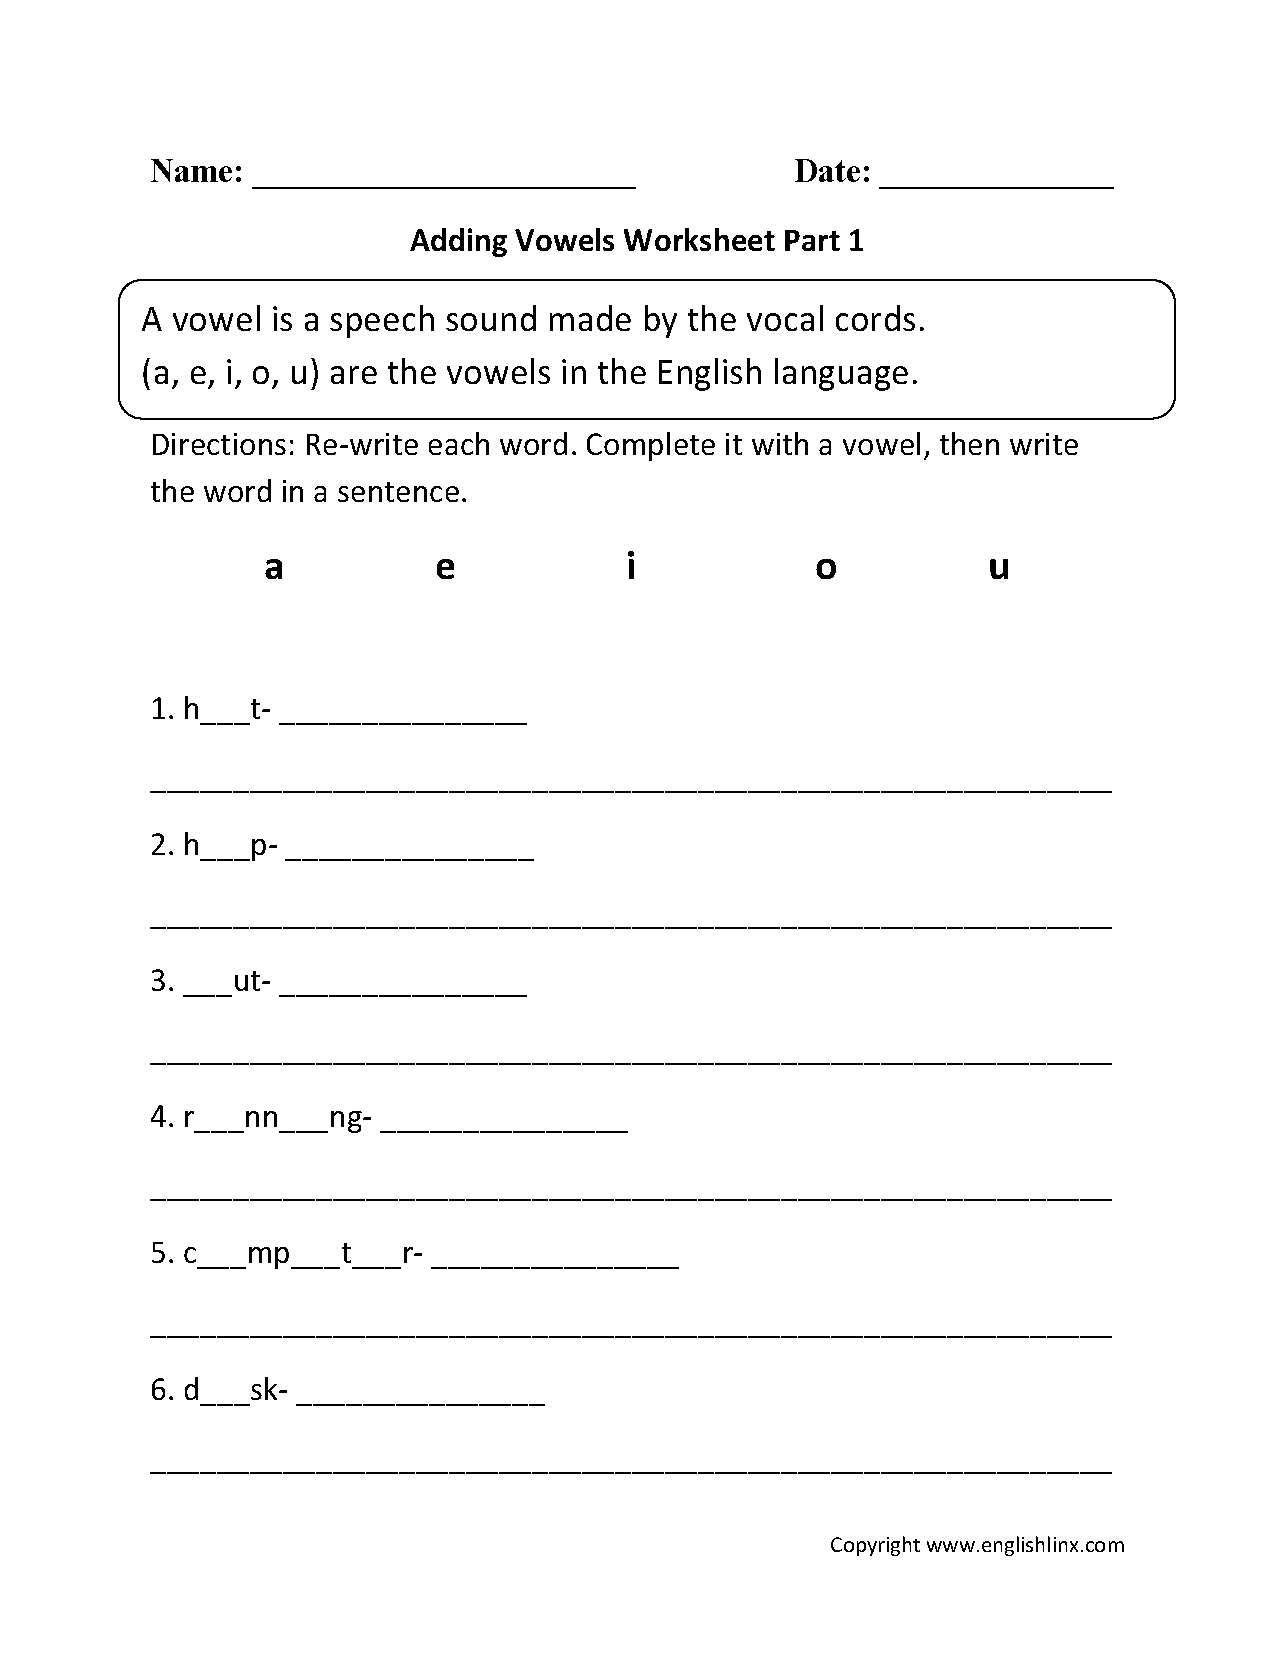 Suffix Ly Worksheet Pdf or Kids Worksheet for Class 1 English Nco Nso Imo Ieo Igko Class